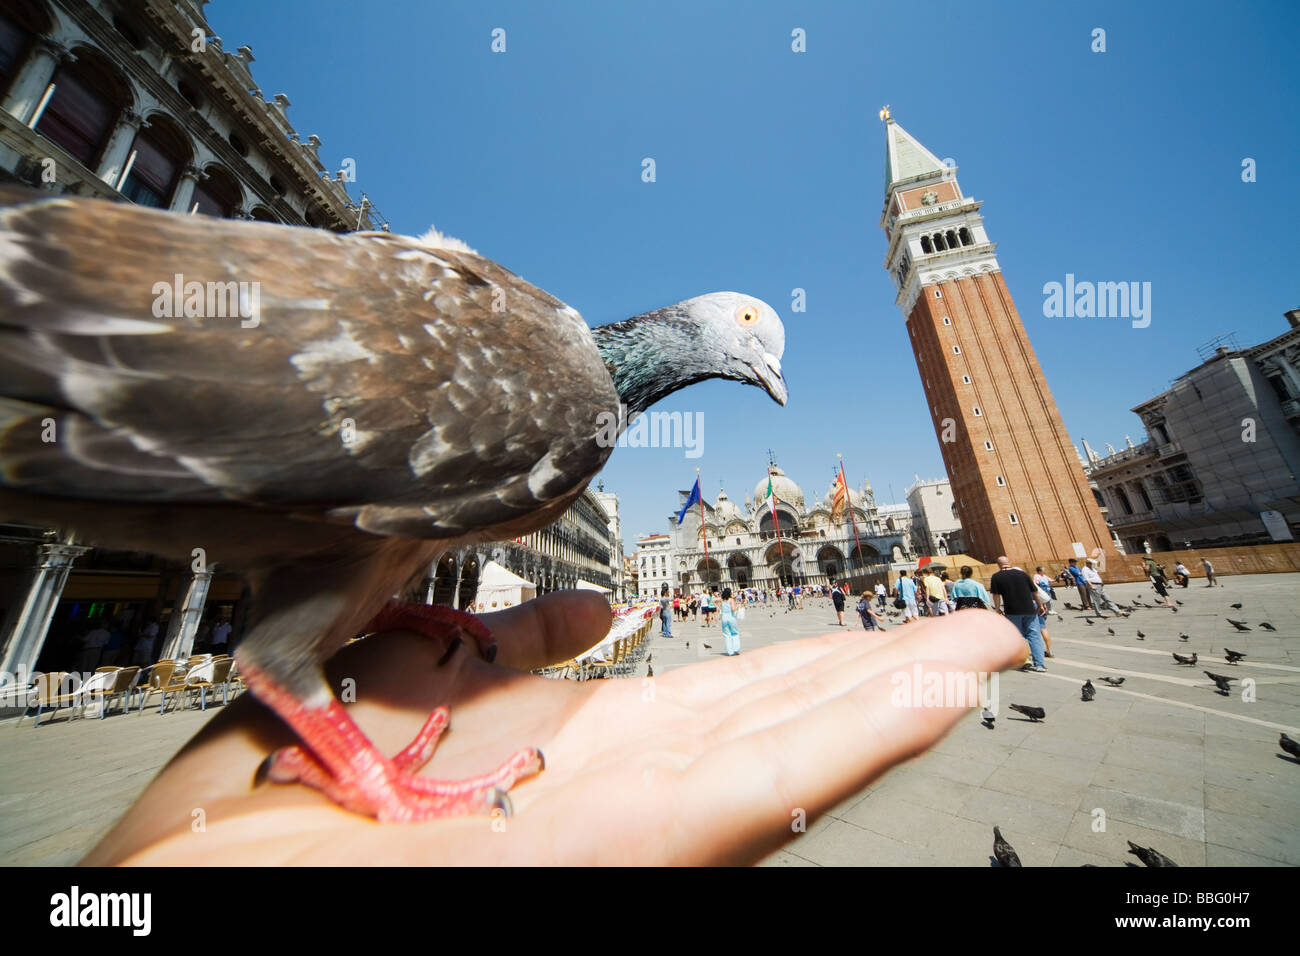 A pigeon on a persons hand in st marks square Stock Photo